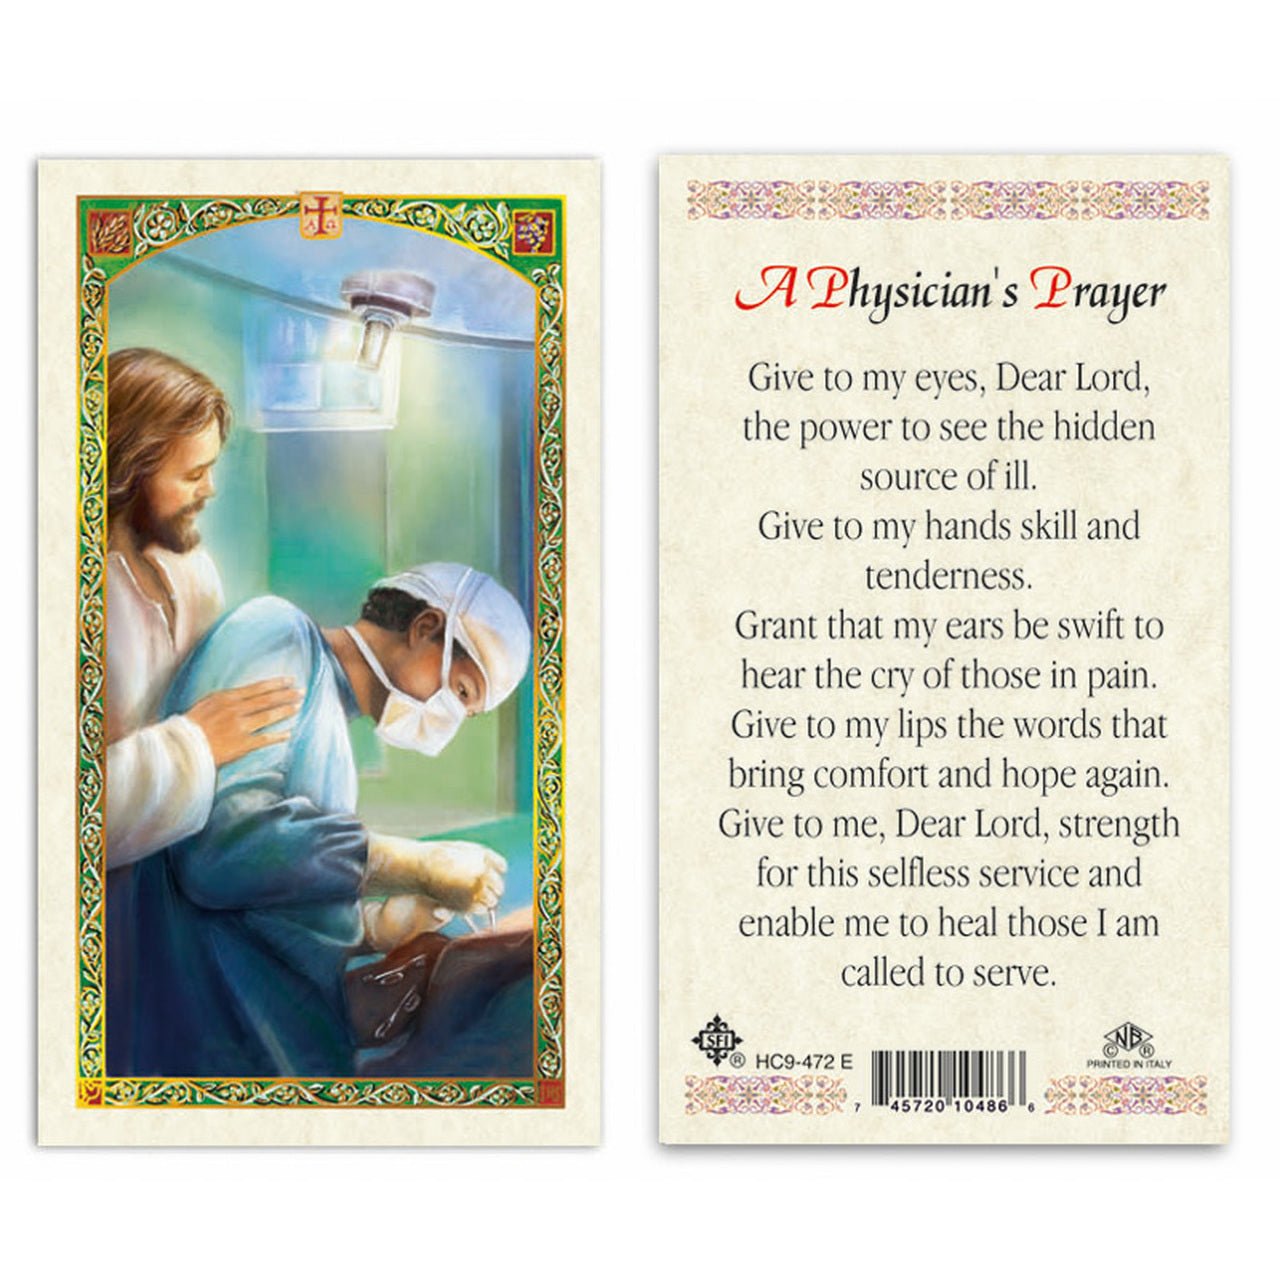 Prayer Card A Physician's Prayer Laminated HC9-472E - Ysleta Mission Gift Shop- VOTED El Paso's Best Gift Shop